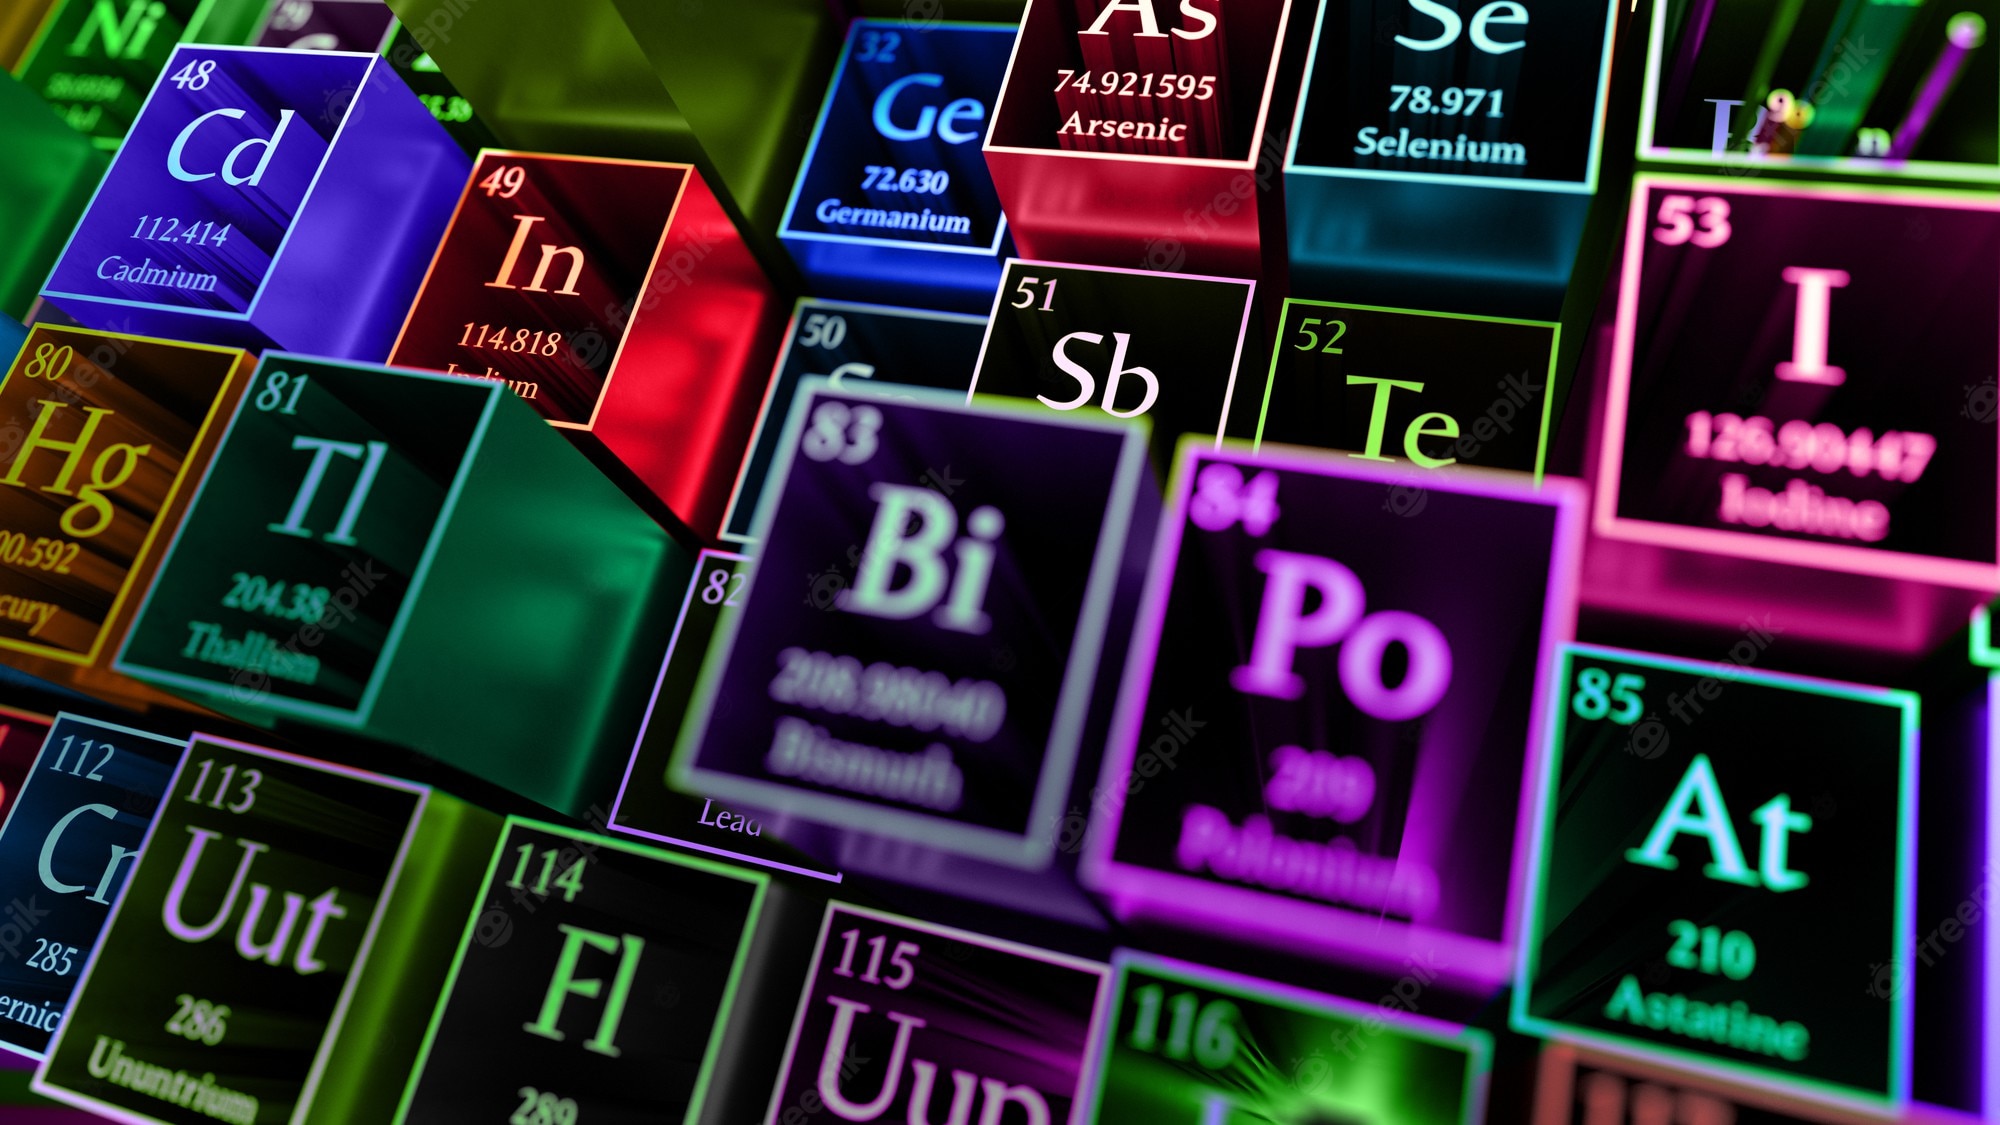 Premium Photod render abstract chemical background. periodic table of elements. mendeleev`s table fragment. metal material